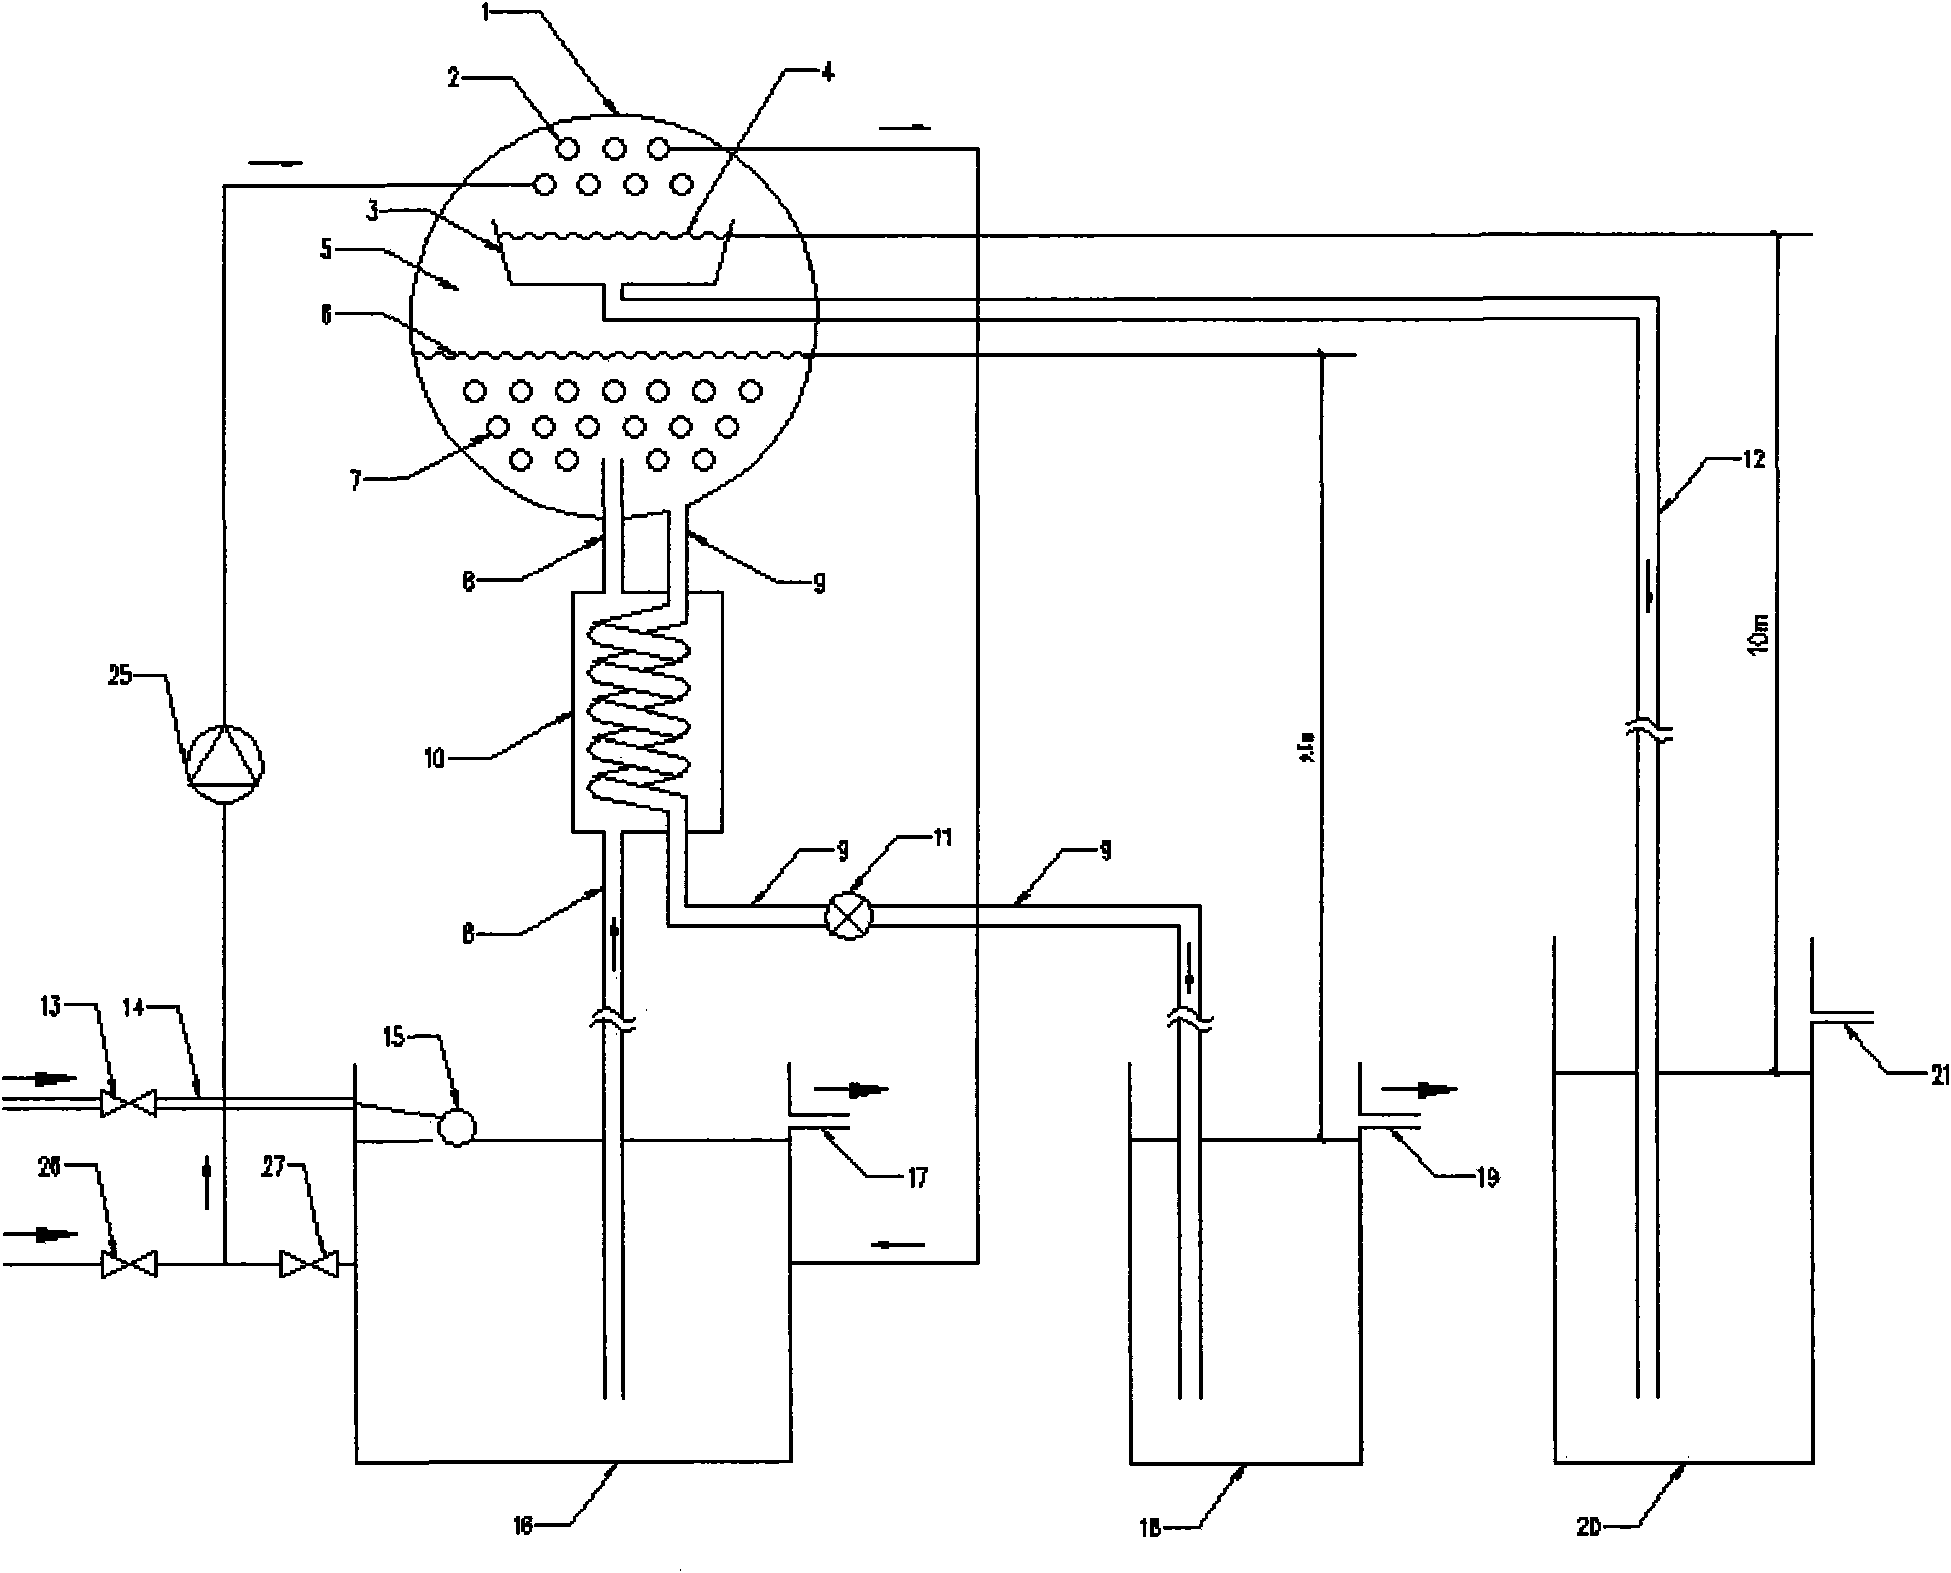 Low-temperature heat energy driven device for distilling and separating water evaporated under negative pressure